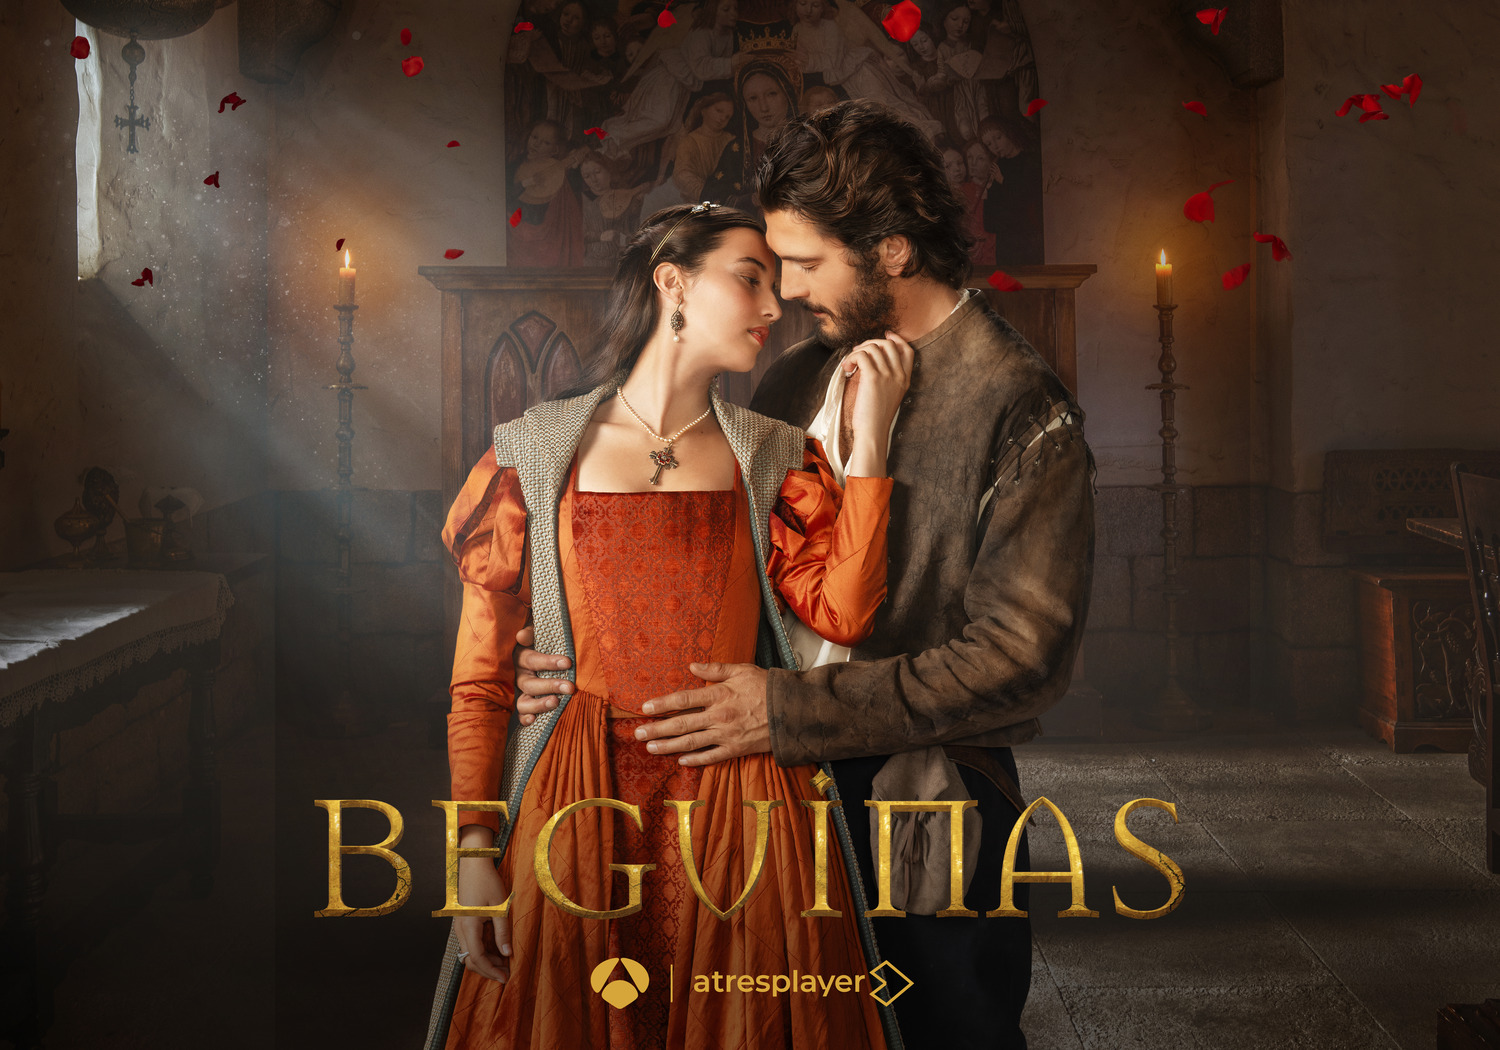 Extra Large TV Poster Image for Beguinas (#1 of 5)